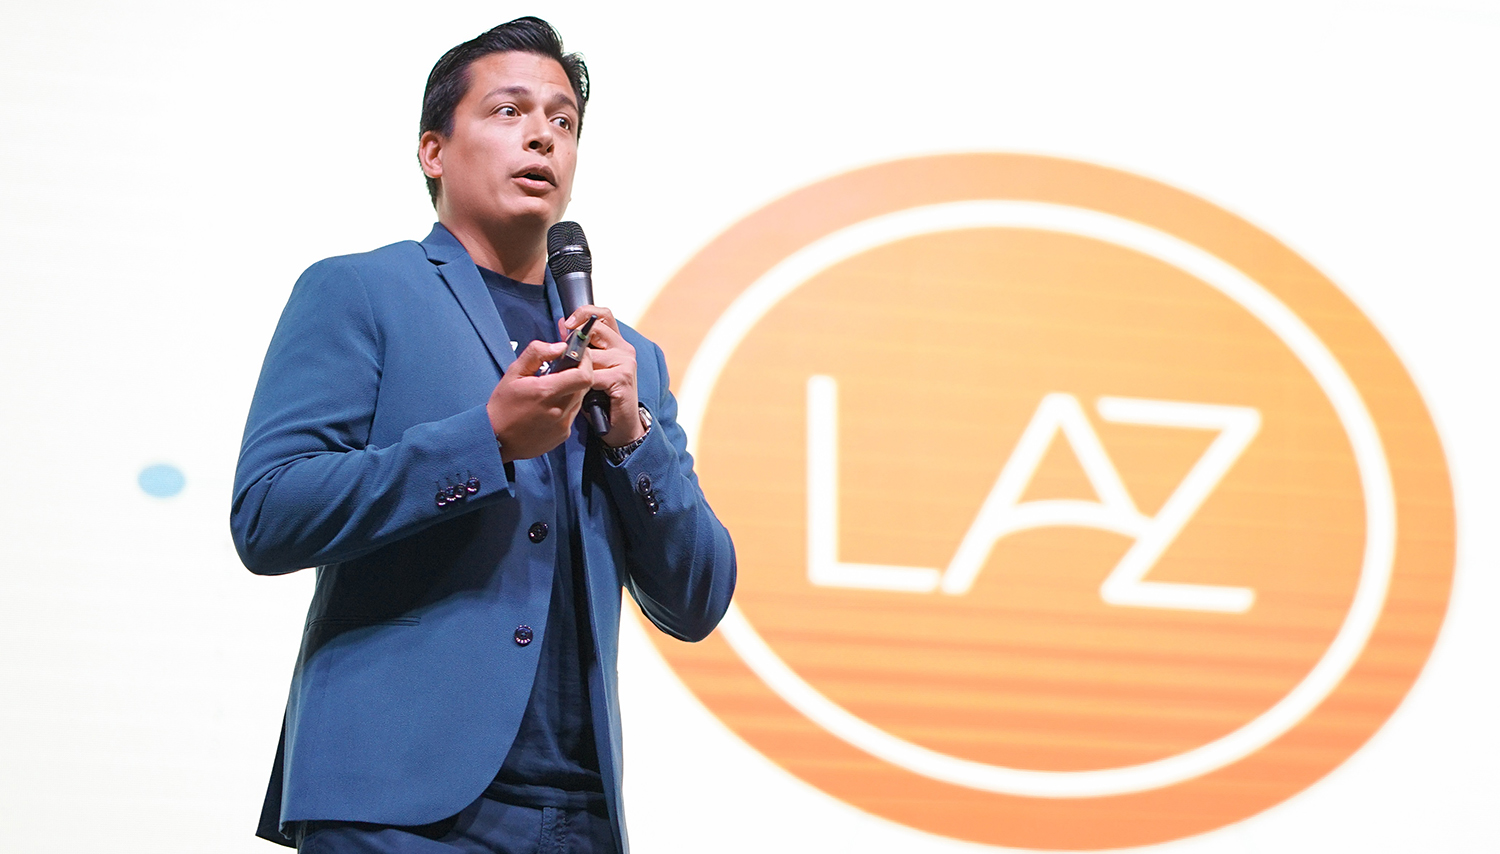 Lazada launches #EveryoneCanSell, aims to attract 50,000 new merchants: Page 2 of 2